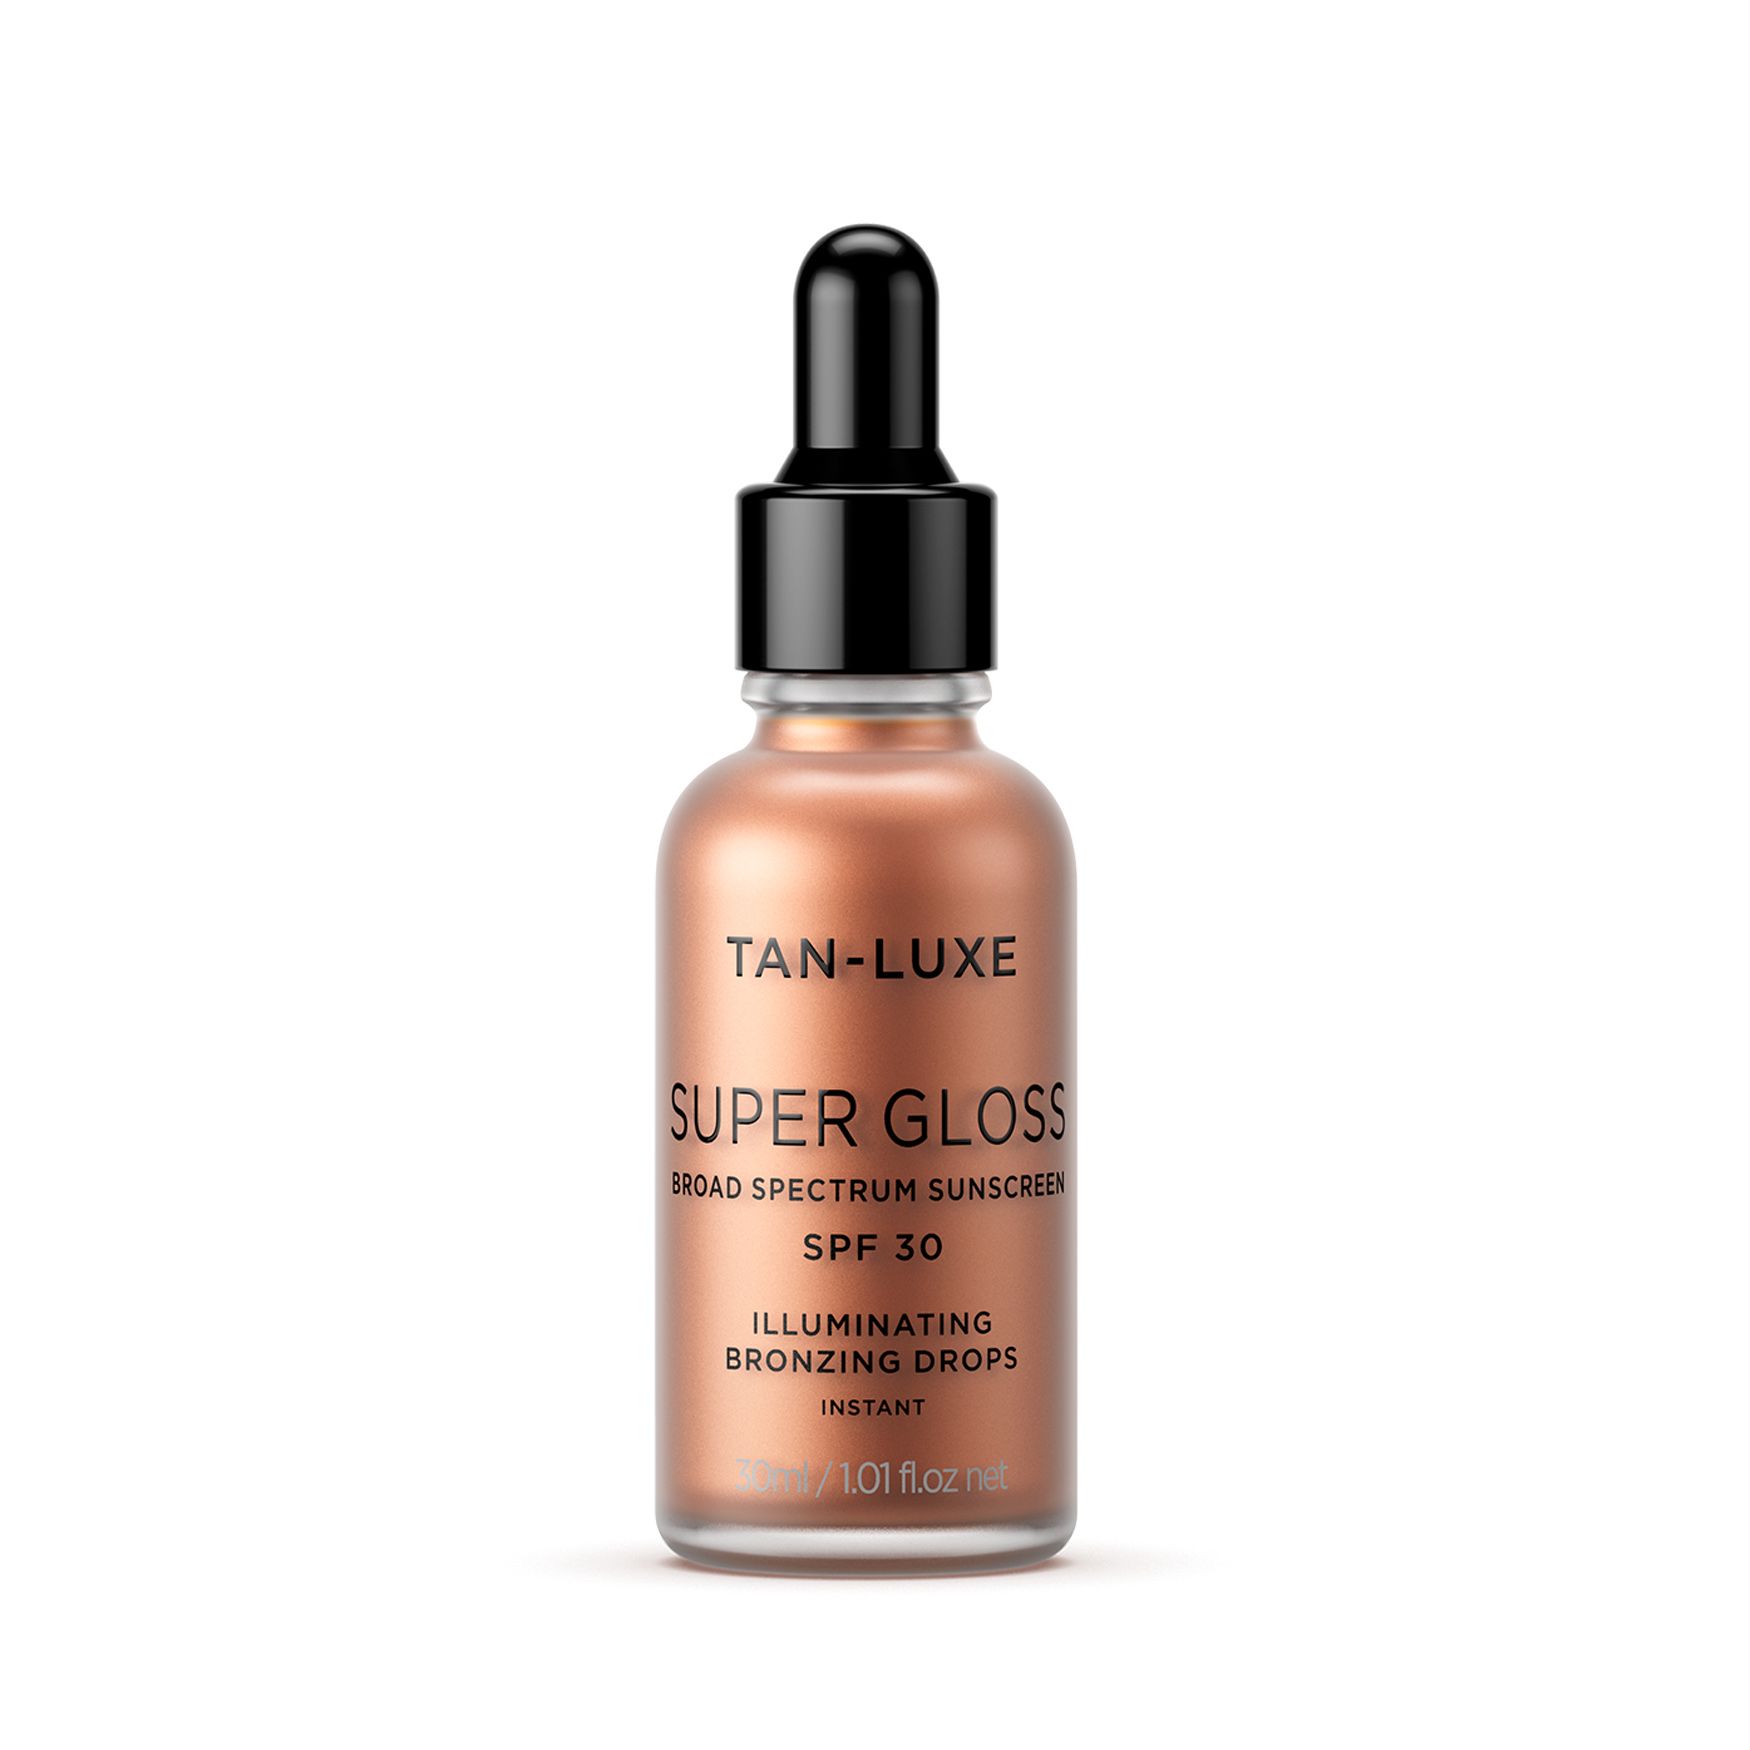 Tan-Luxe Super Gloss SPF 30 | Space NK | Space NK - UK